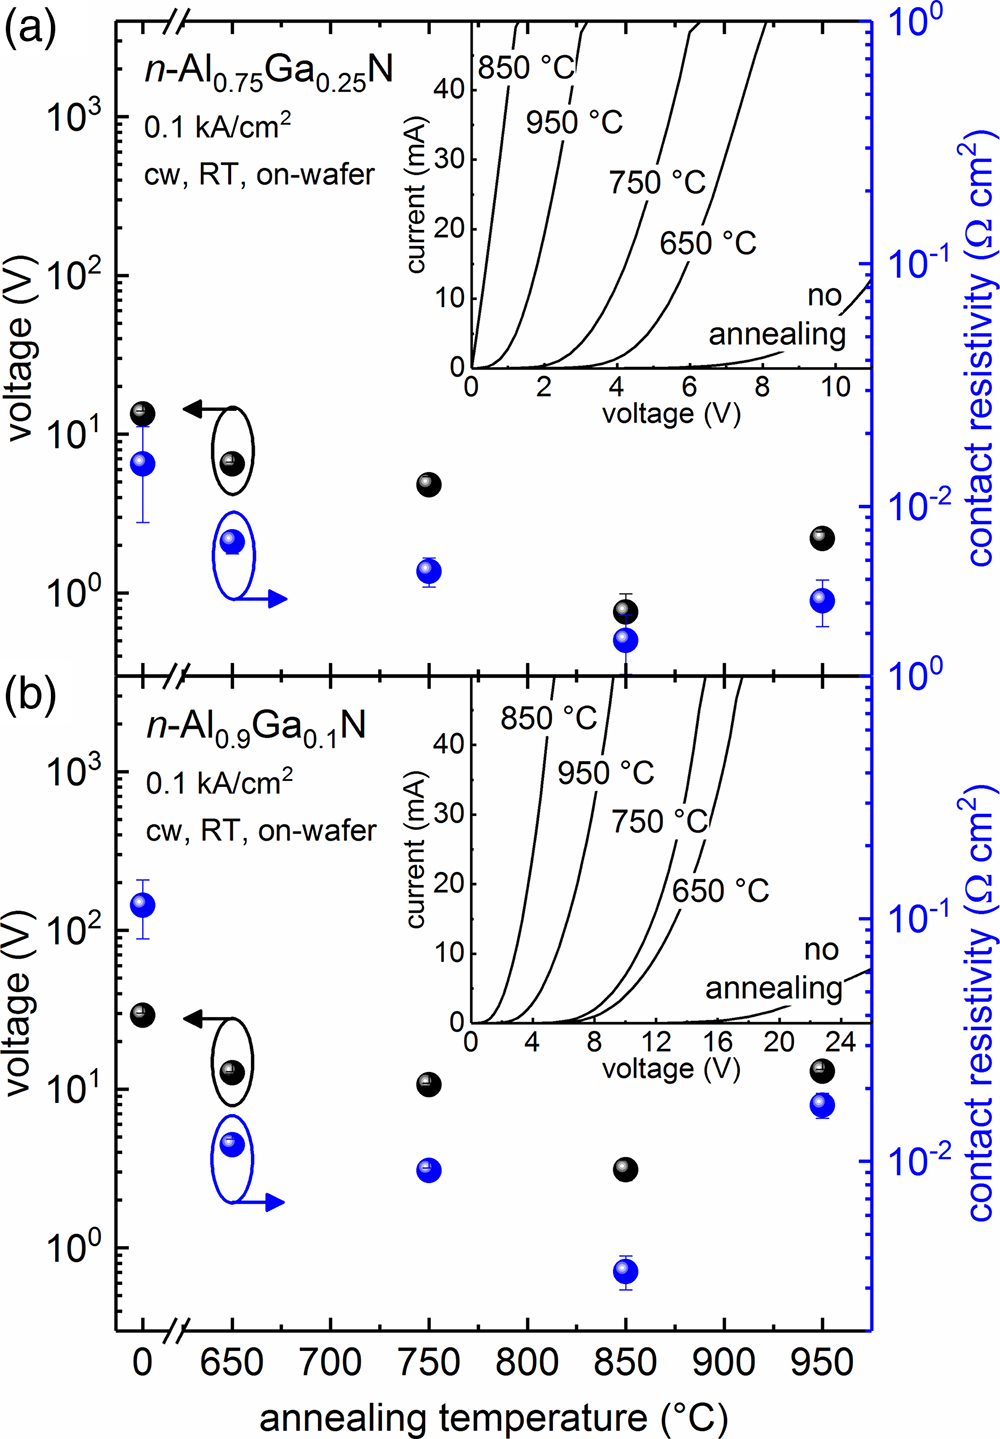 Contact resistivity and voltage evaluated at 0.1 kA/cm2 as a function of the annealing temperature for n-contacts on (a) n‐Al0.75Ga0.25N and on (b) n‐Al0.9Ga0.1N. The insets show the experimental IV curves at an electrode distance of 8 μm for different annealing temperatures.